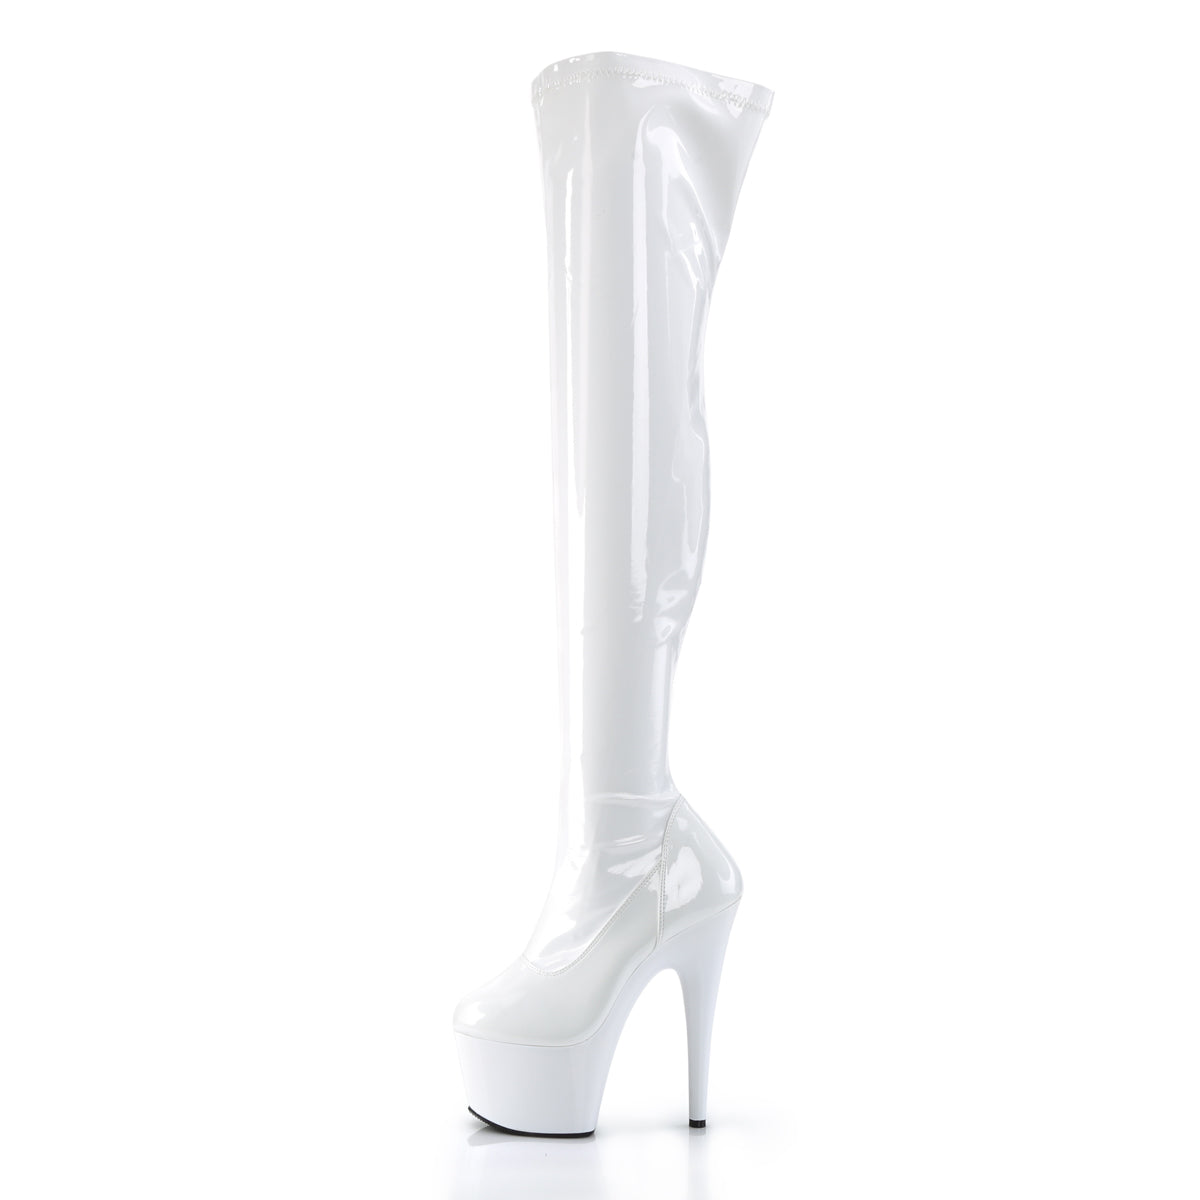 ADORE-3000 / W / M 7 "PLEASER FAST DELIVERY 24-48h 